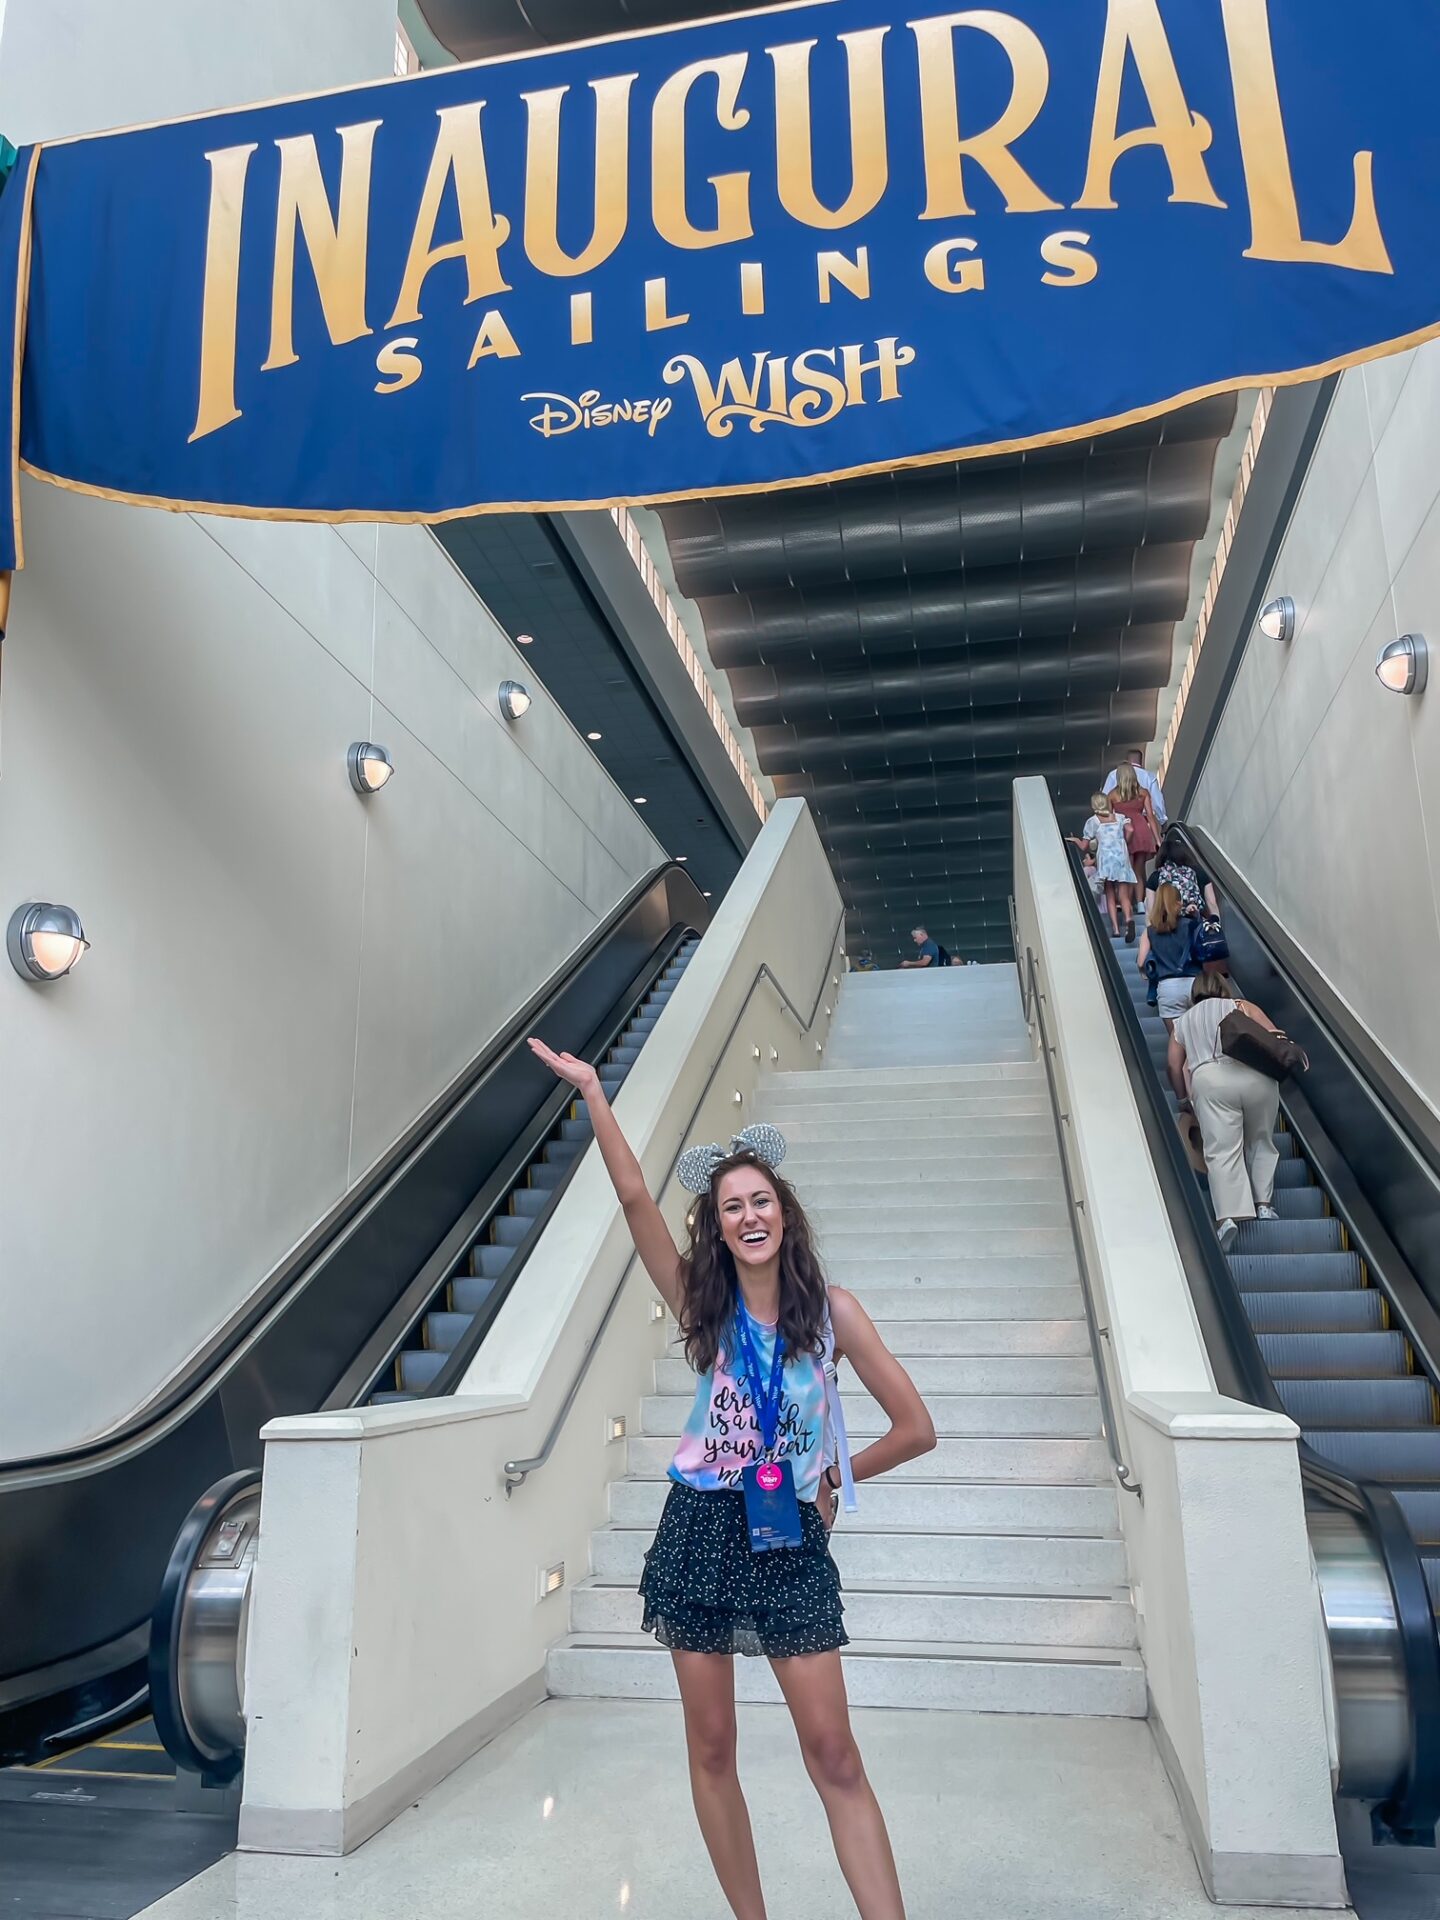 Our Inaugural Sail on the DISNEY WISH - its very first sailing! Full Disney Wish Cruise Review with insider tips and a photo diary!